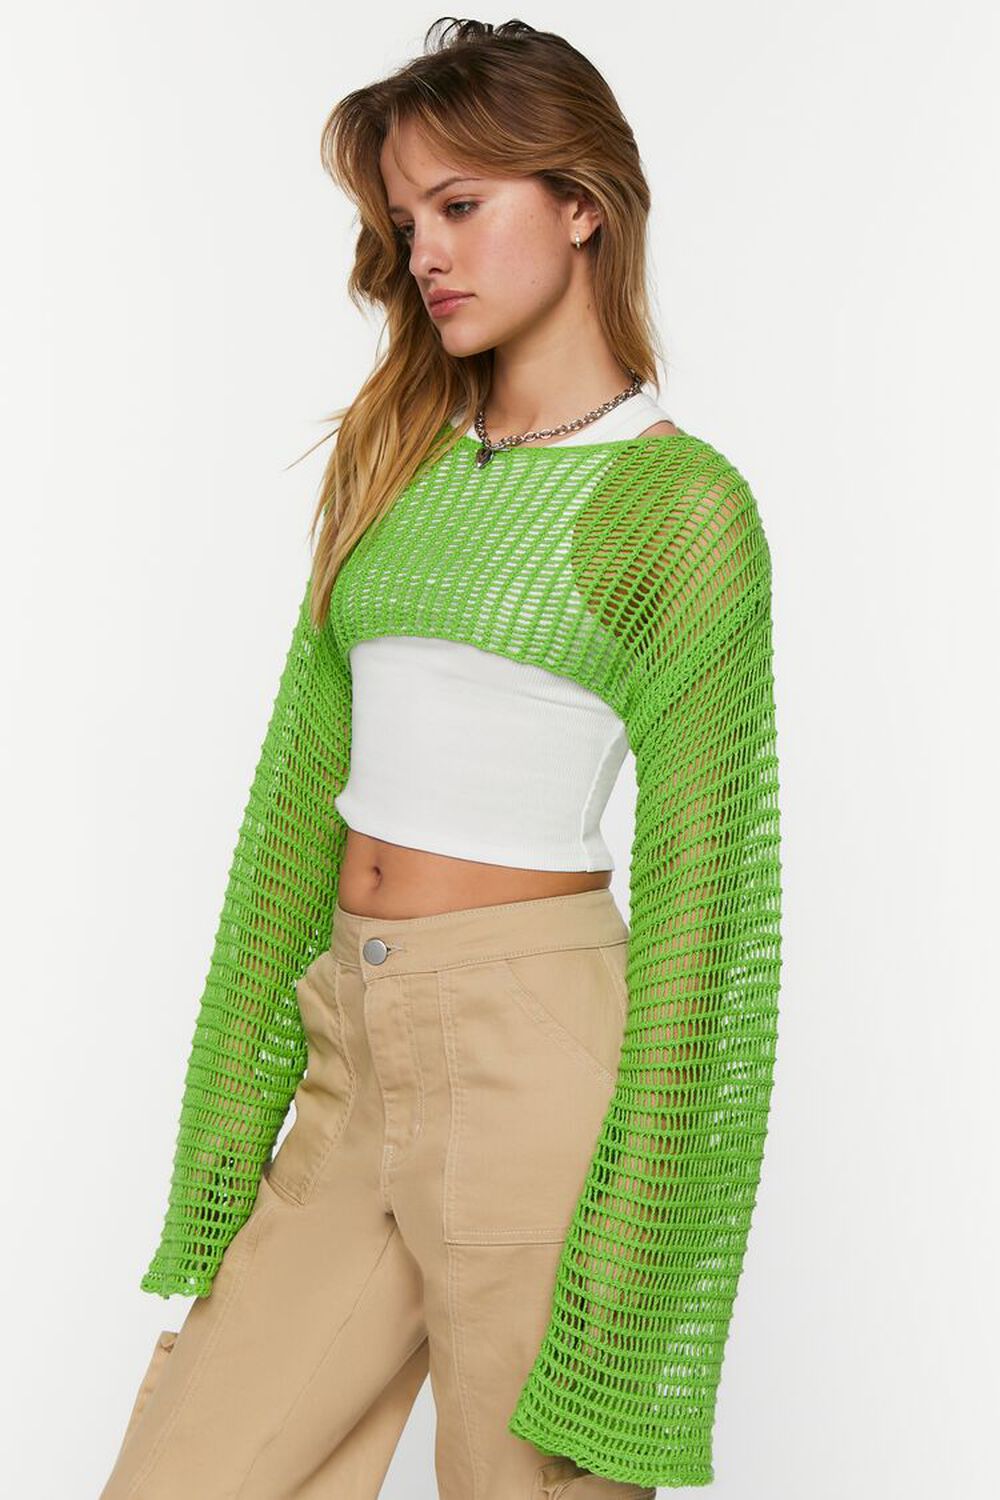 GREEN Netted Crochet Cropped Sweater, image 3